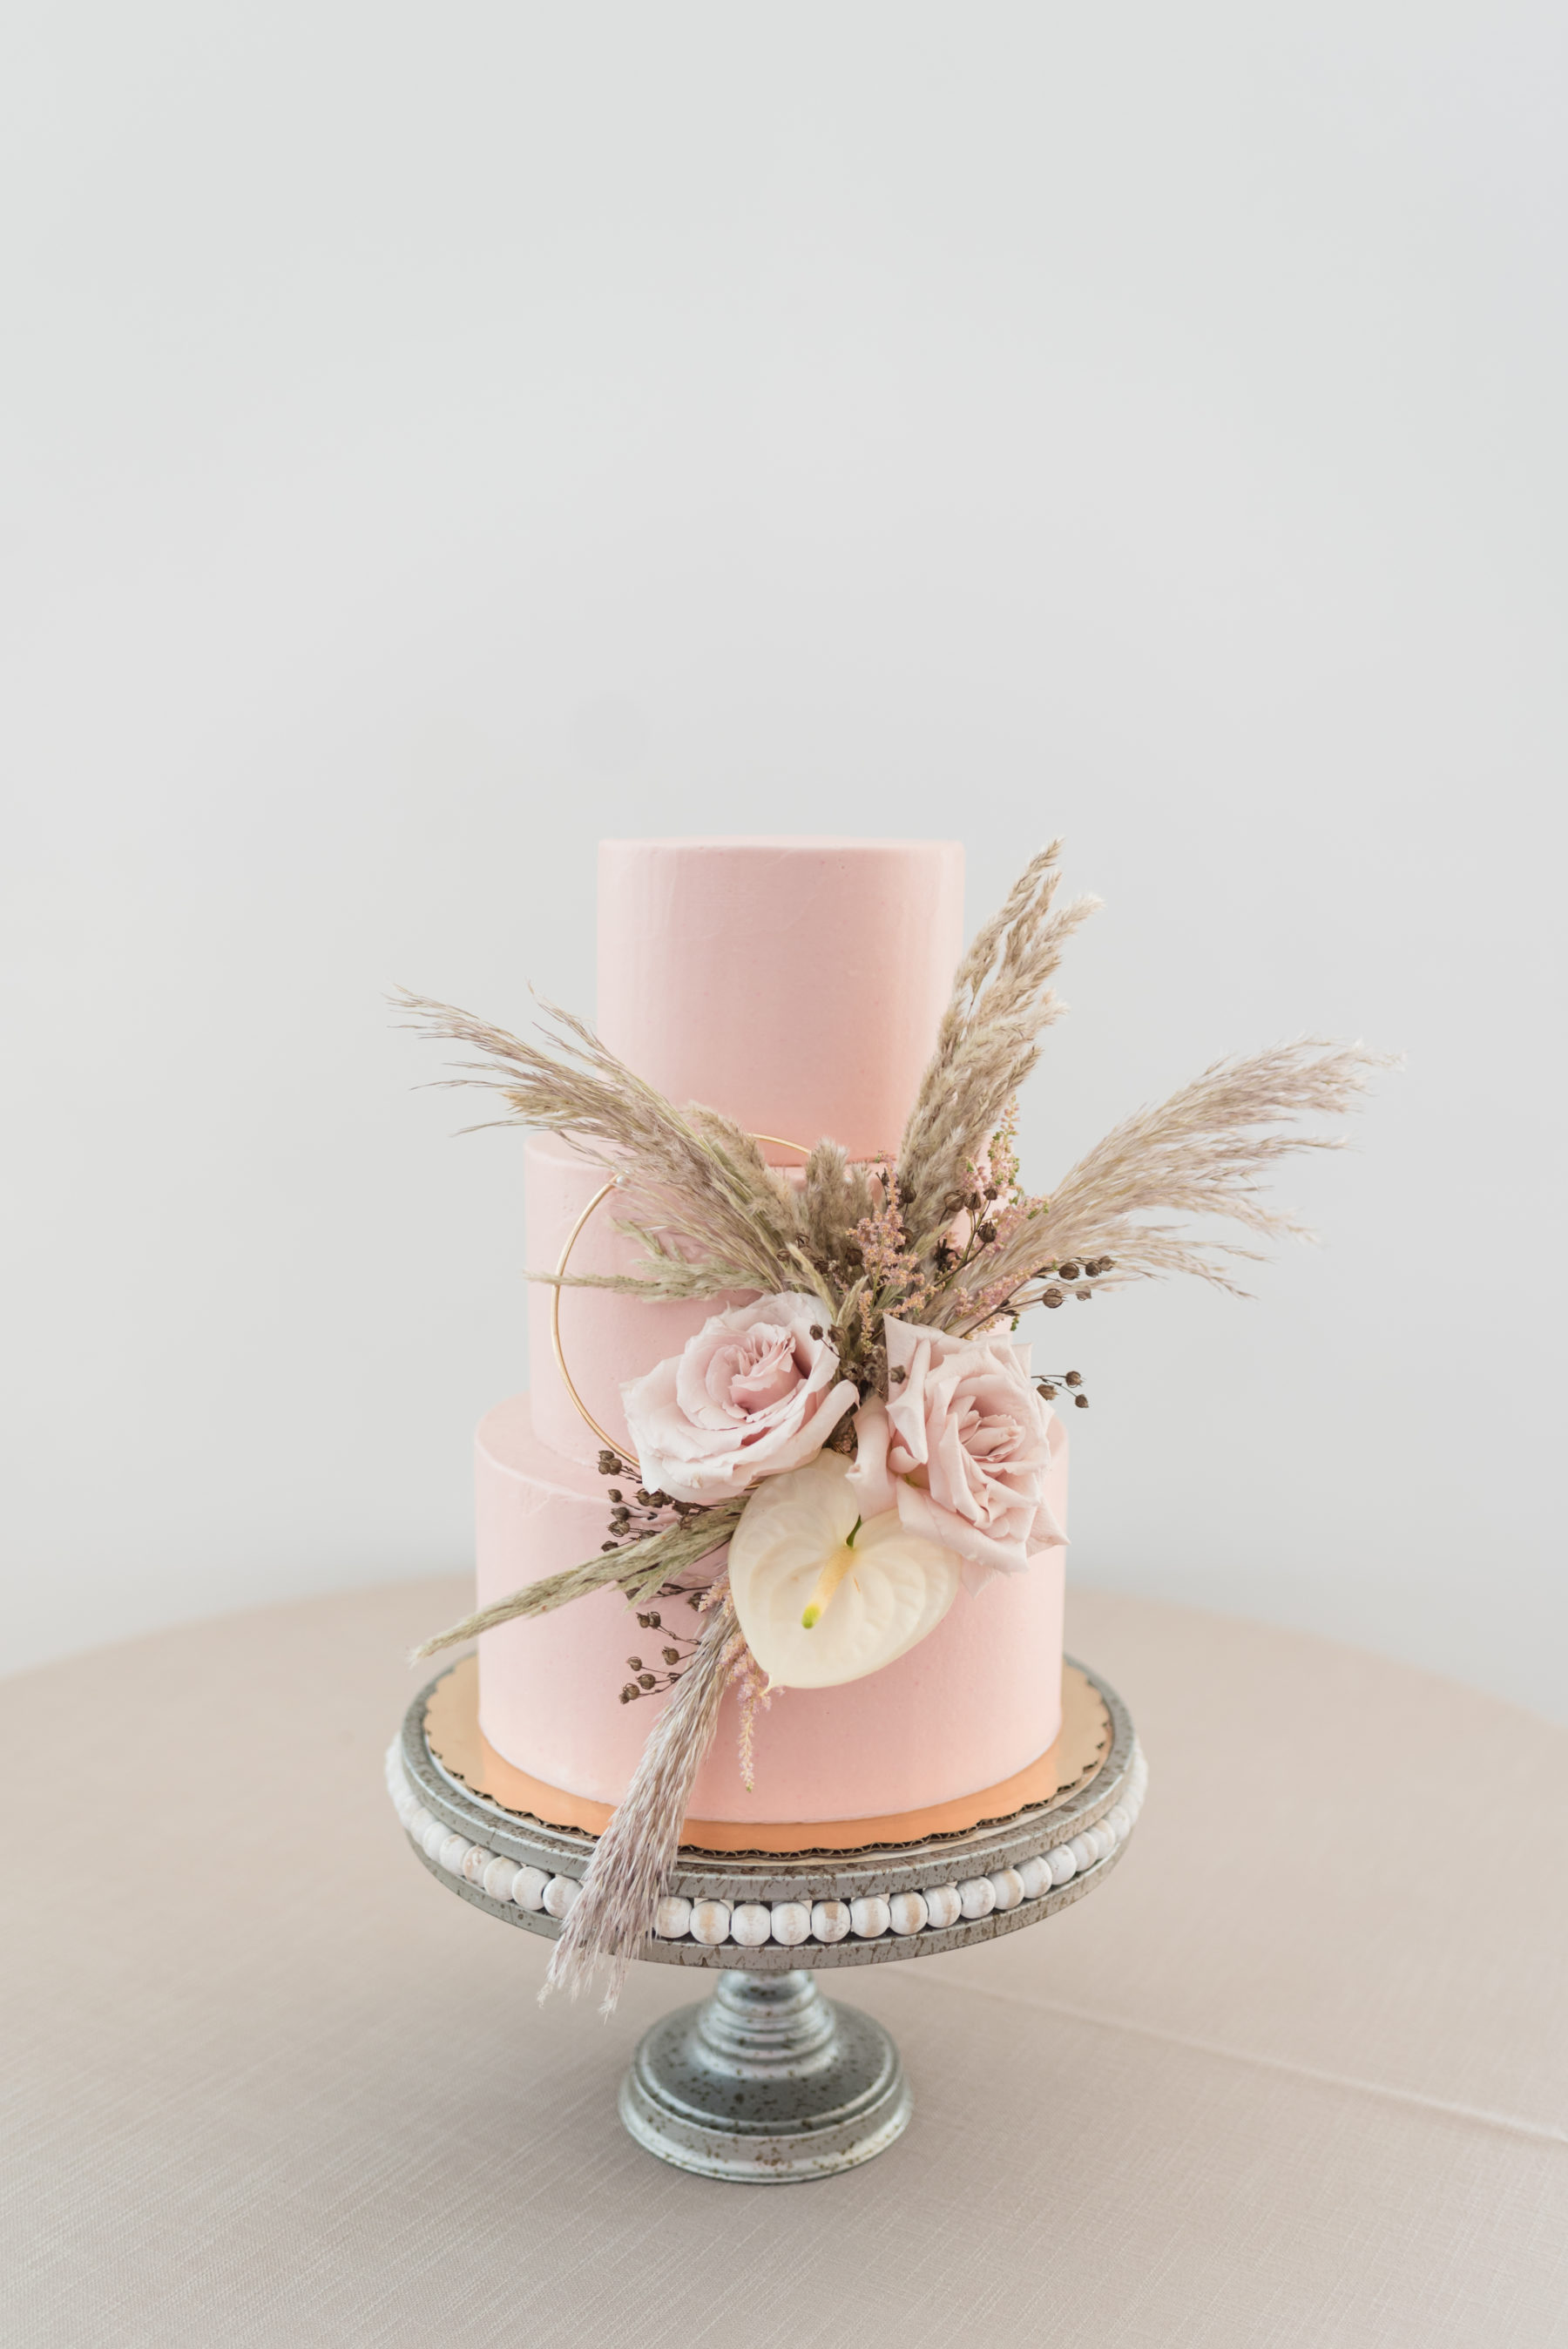 Pink Wedding Cake with Pampas Grass: Organic Eco-Friendly Wedding Styled Shoot featured on Nashville Bride Guide